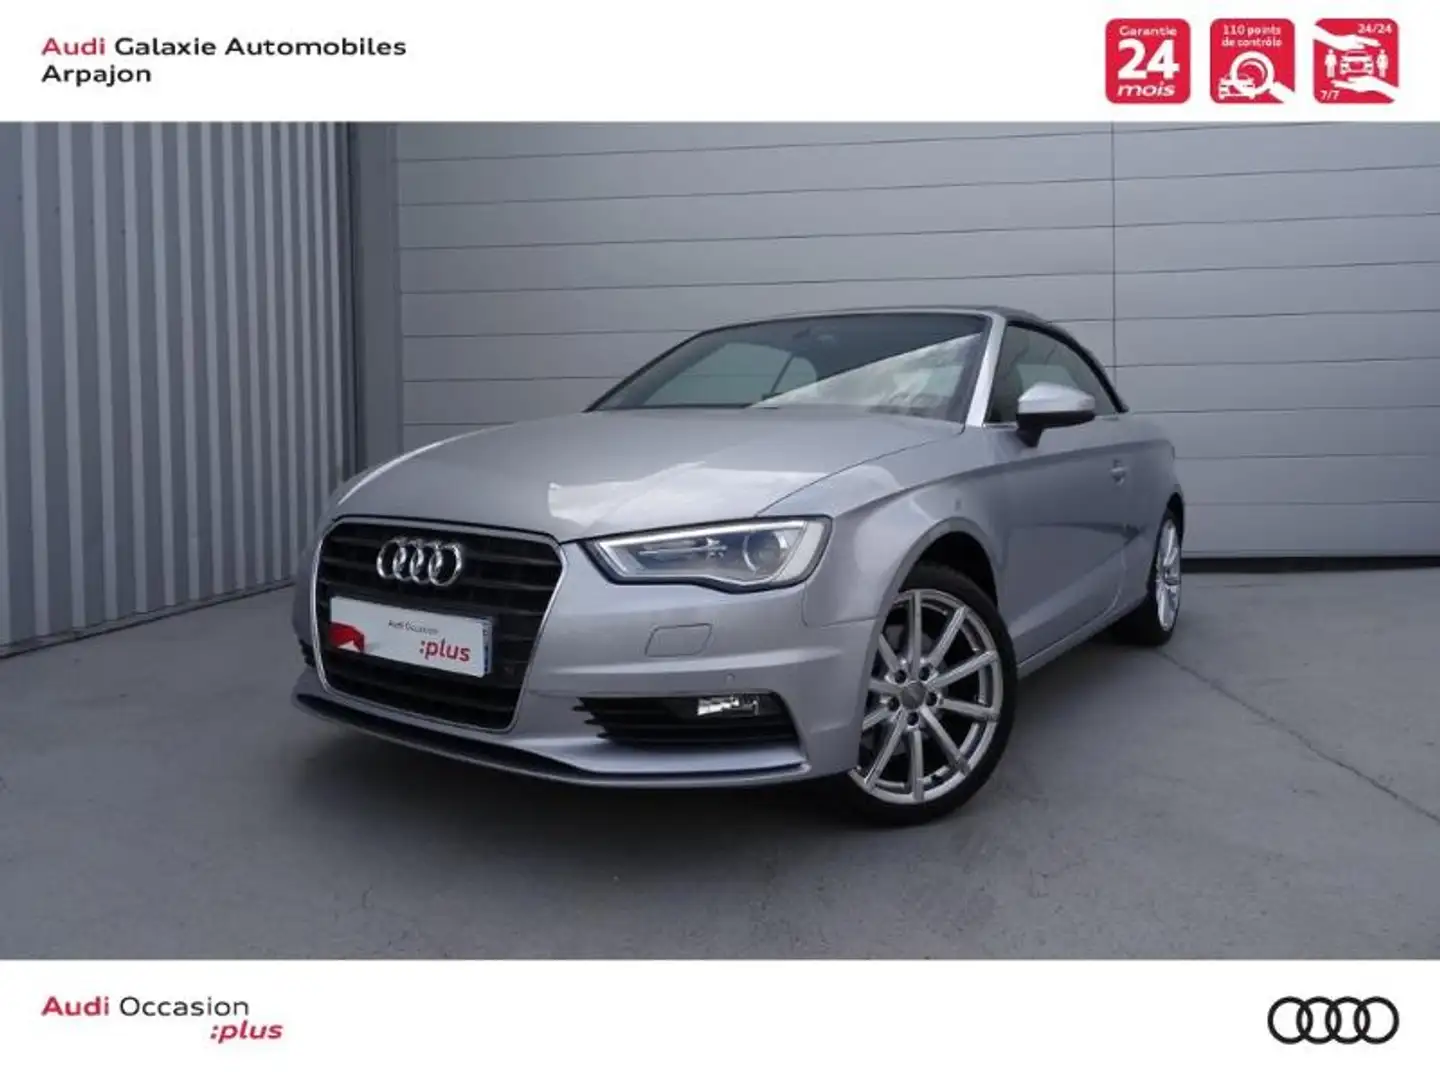 Audi A3 Cabriolet 1.8 TFSI 180ch Ambition Luxe S tronic 7 Grau - 1